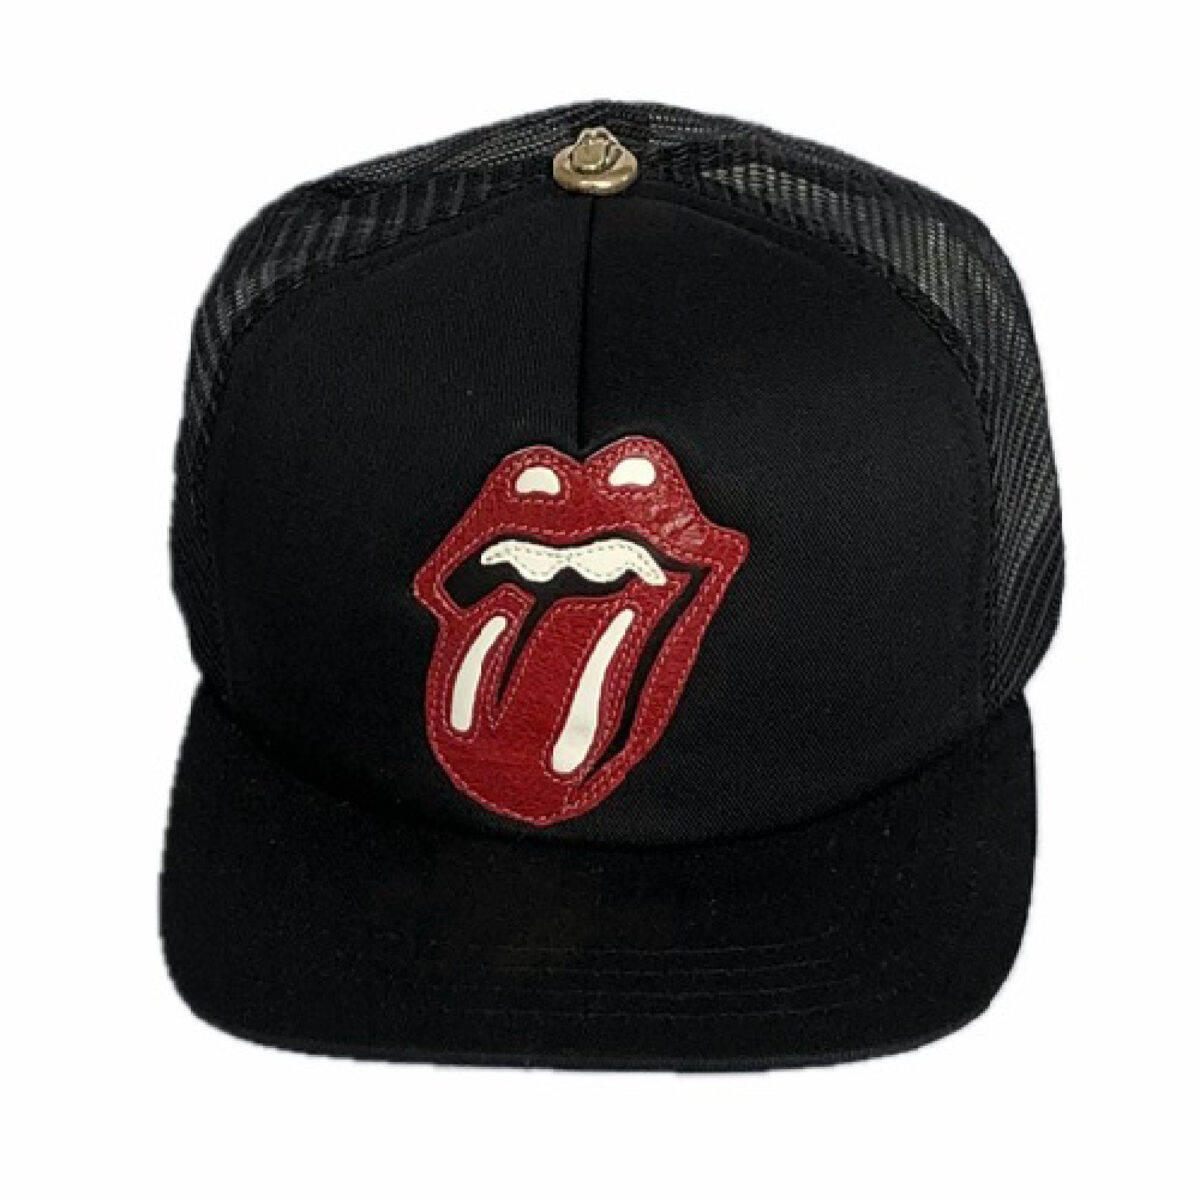 Chrome Hearts X Rolling Stones Leather Patch Trucker Hat – Black